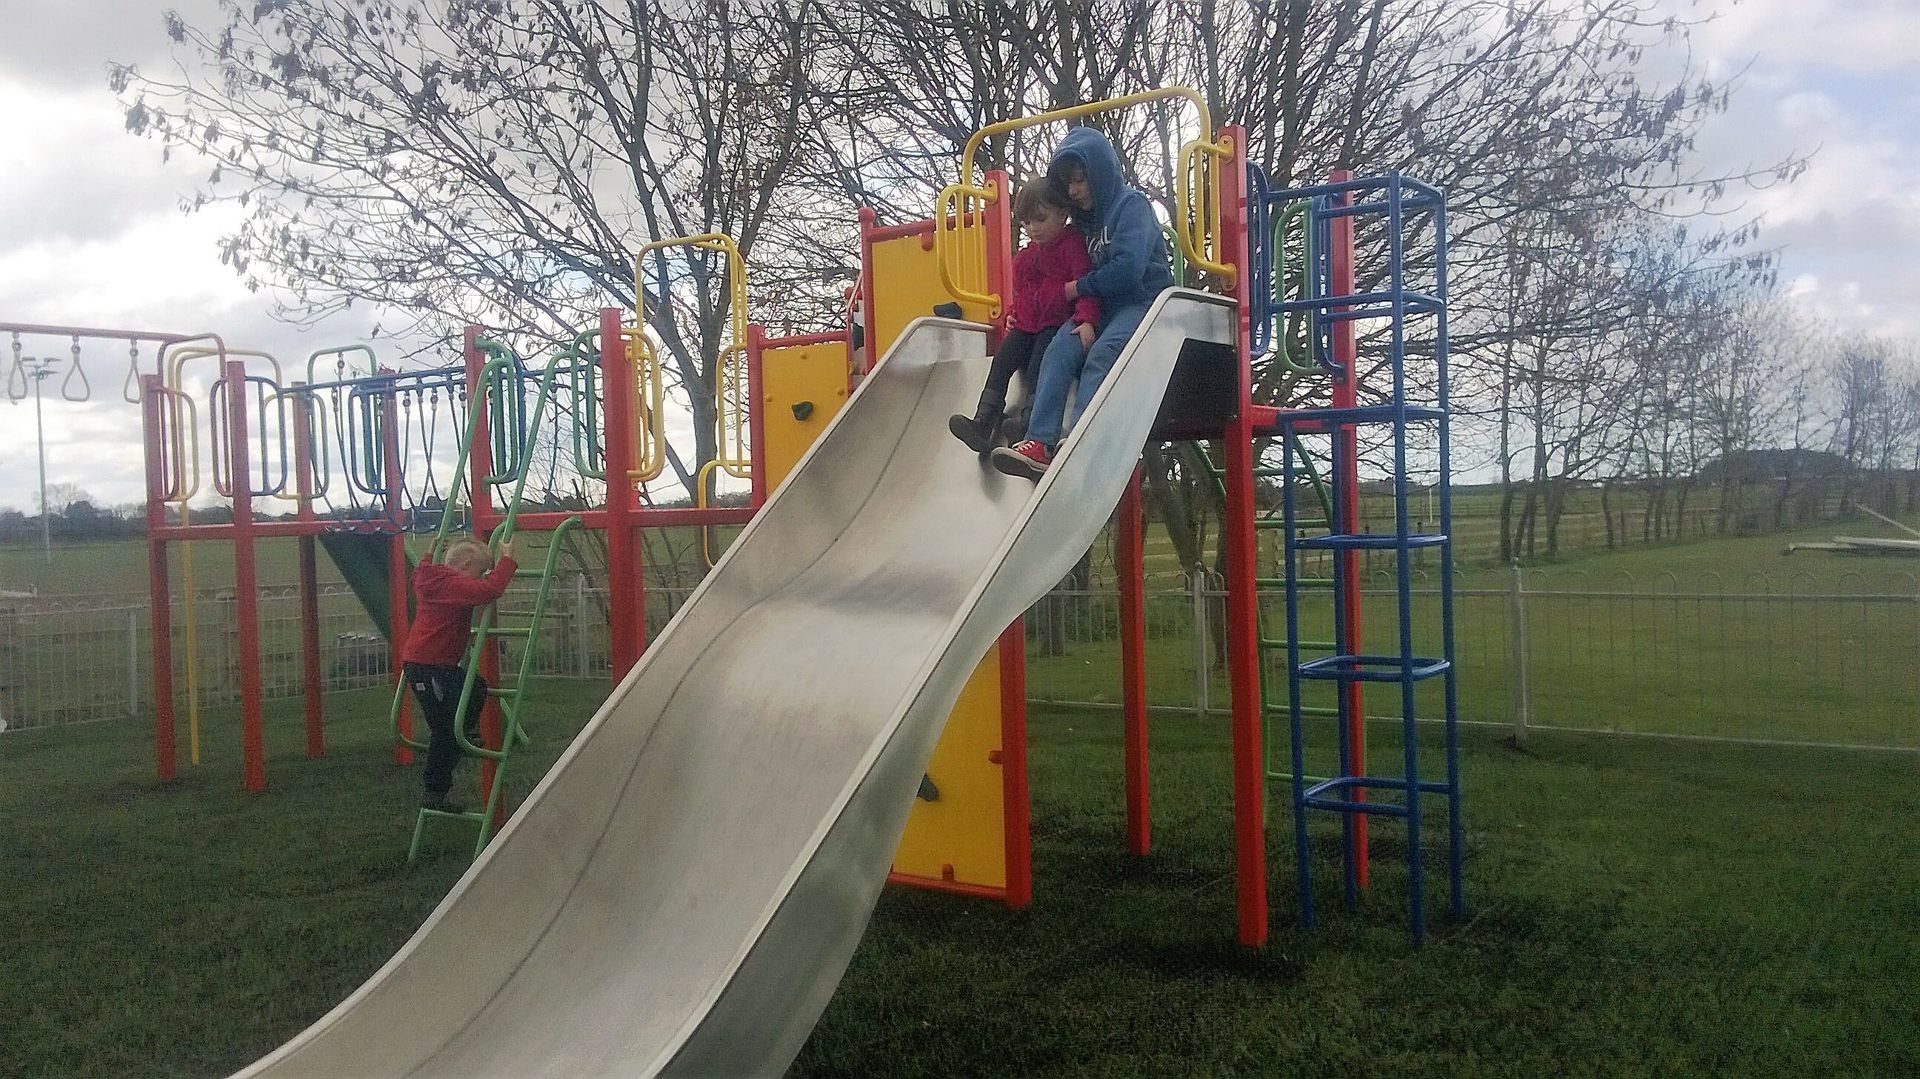 Playground Slide as Part of Climbing Frame